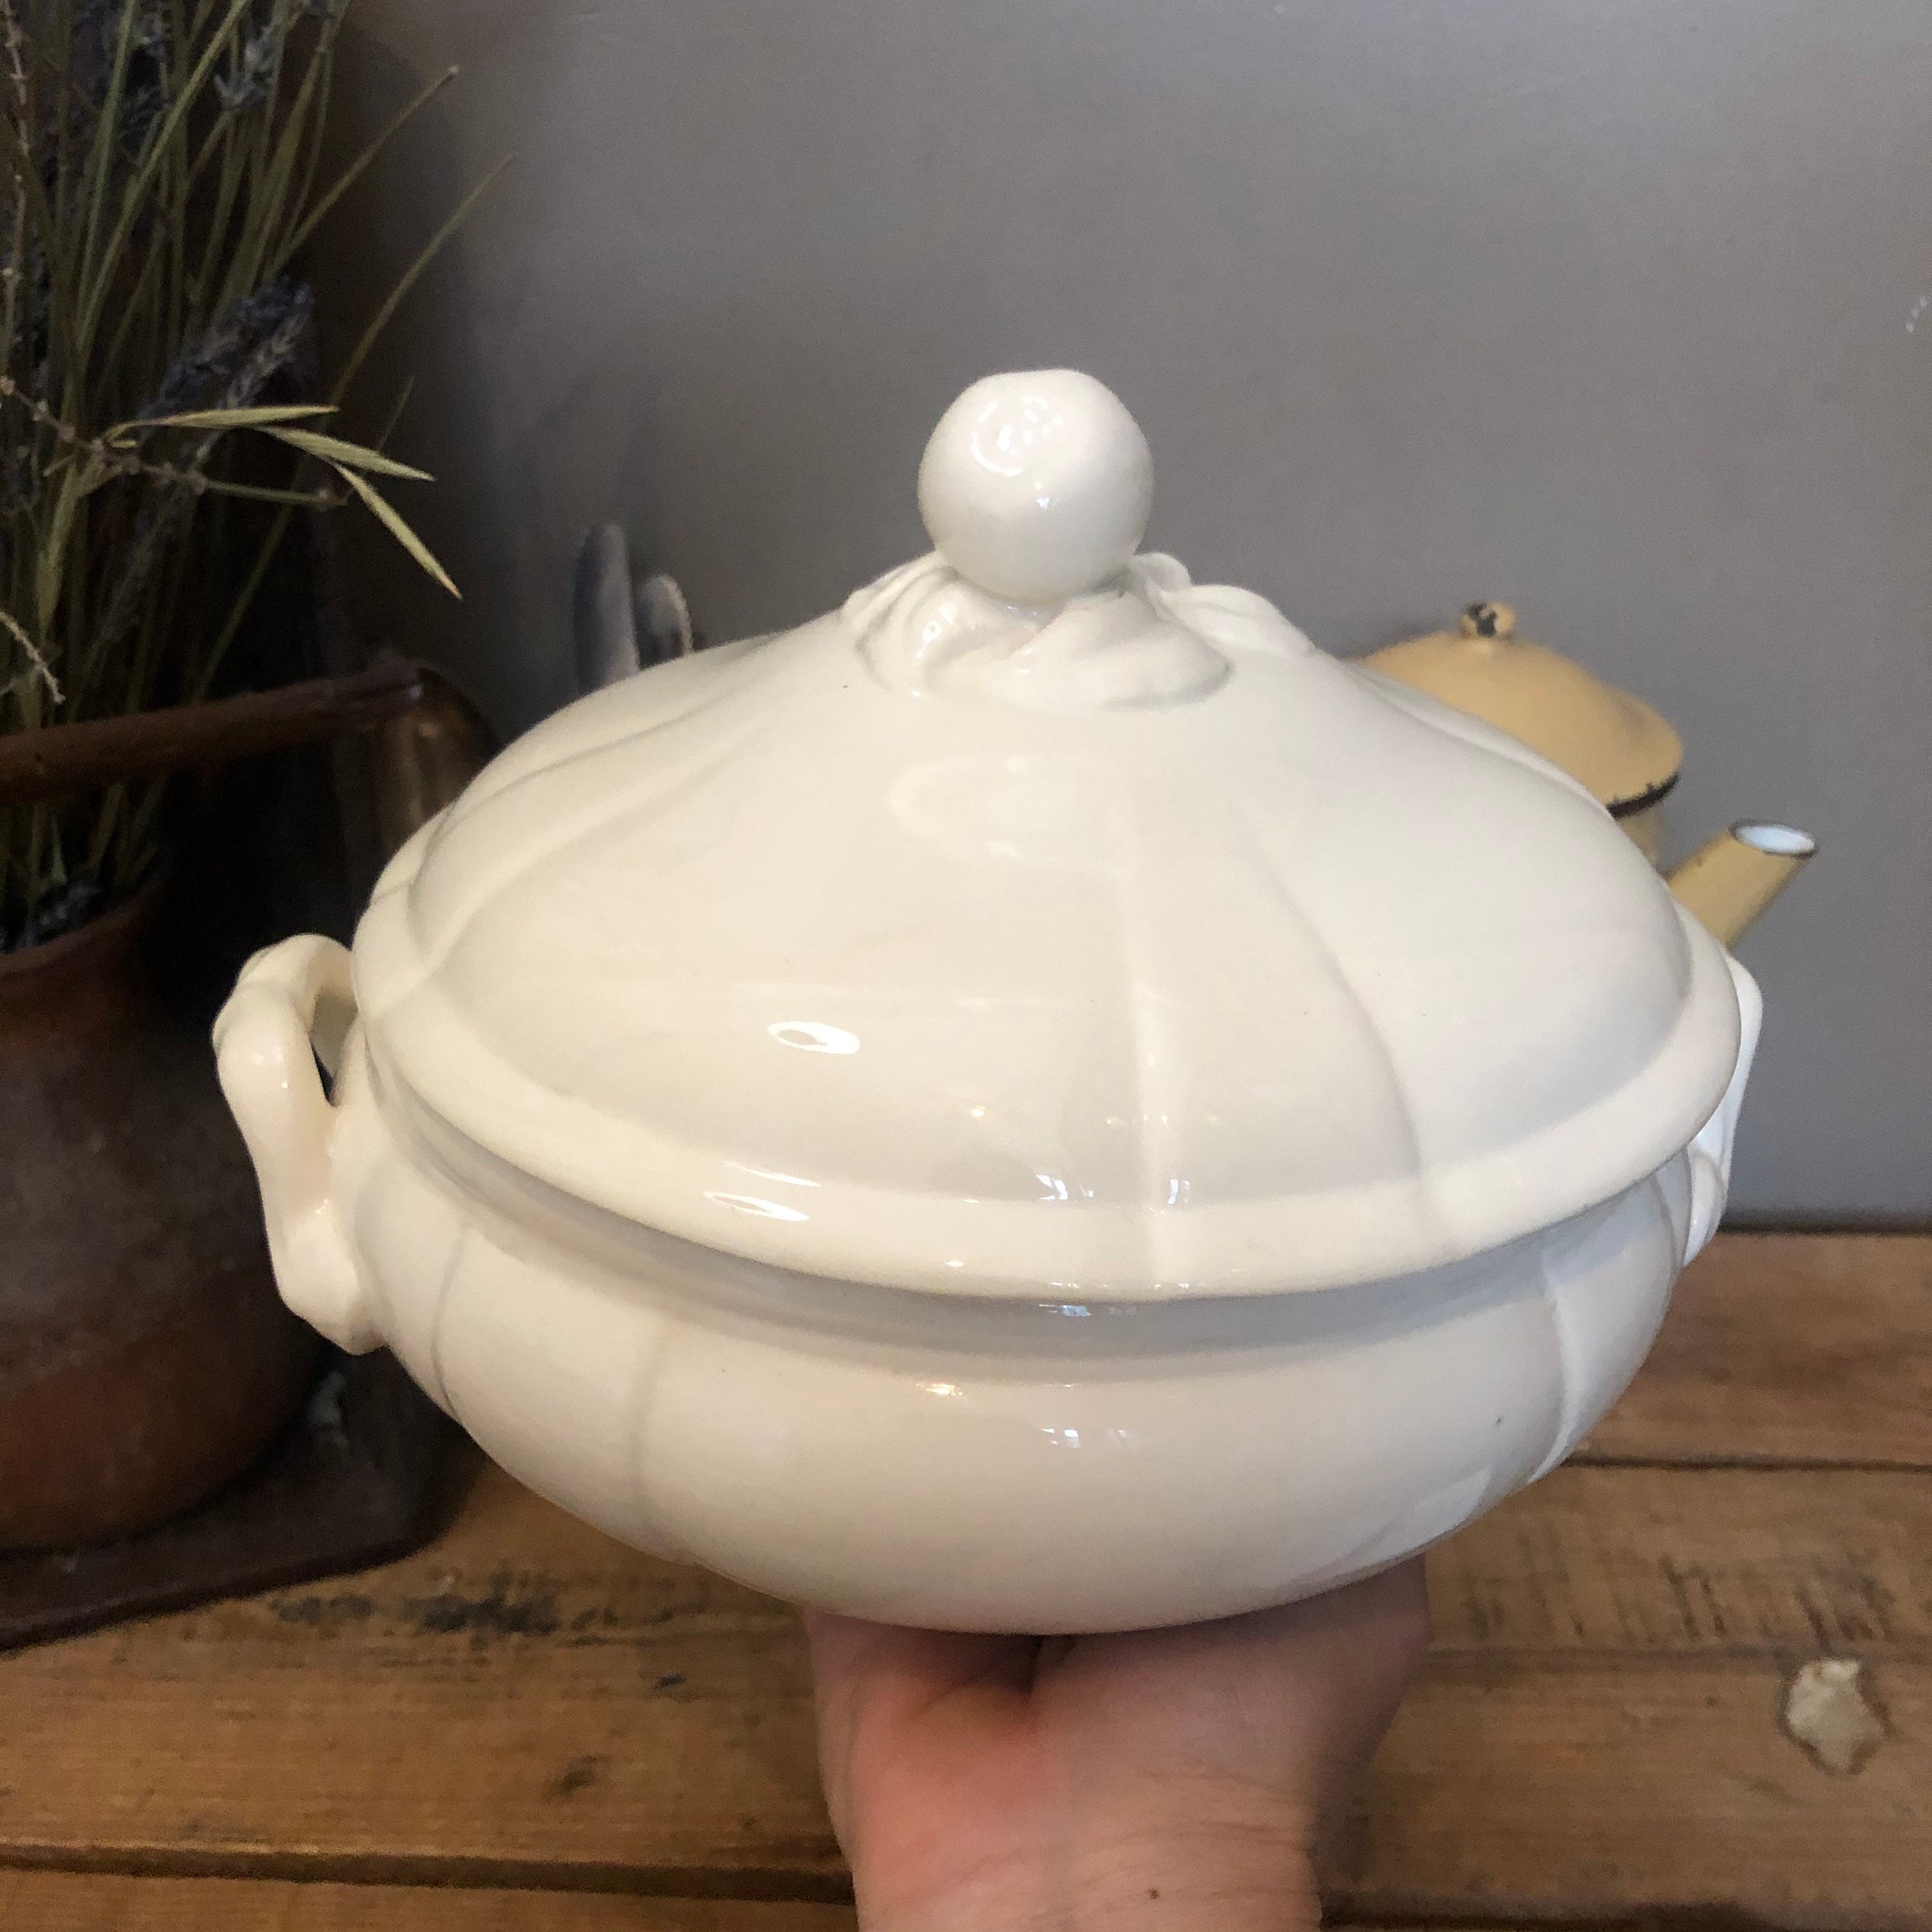 Porcelain Large Soup Tureen Bowl with Handles 2.5 litres White Classic 